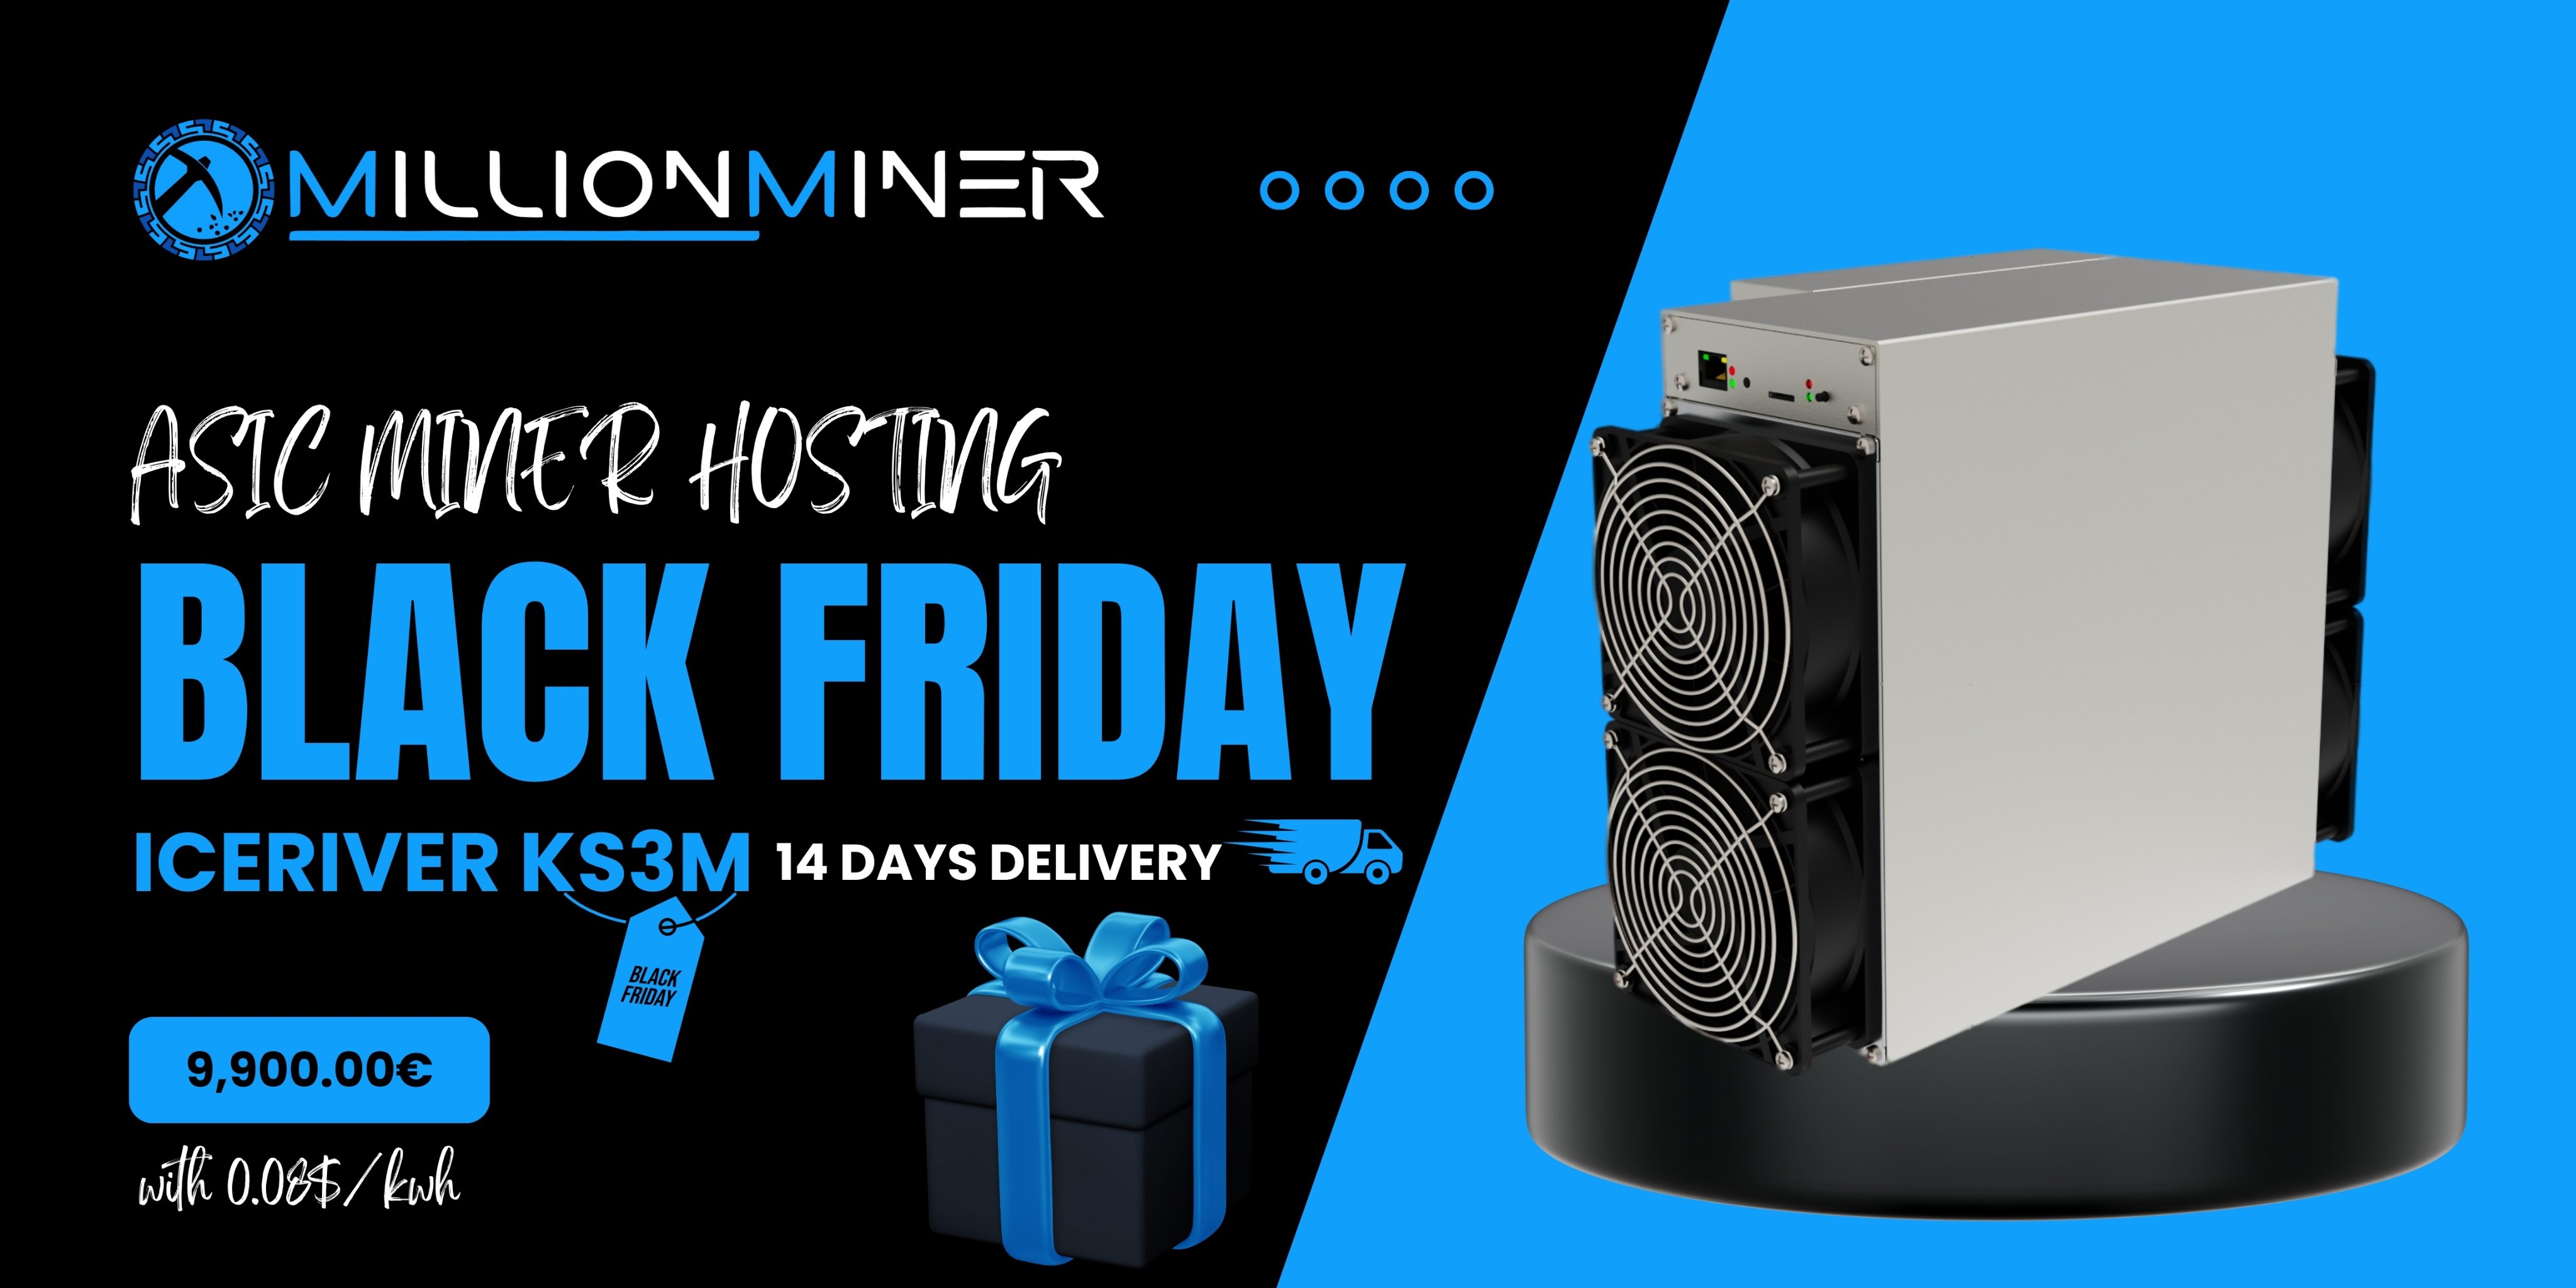 Bitcoin Miners for Sale - MILLIONMINER